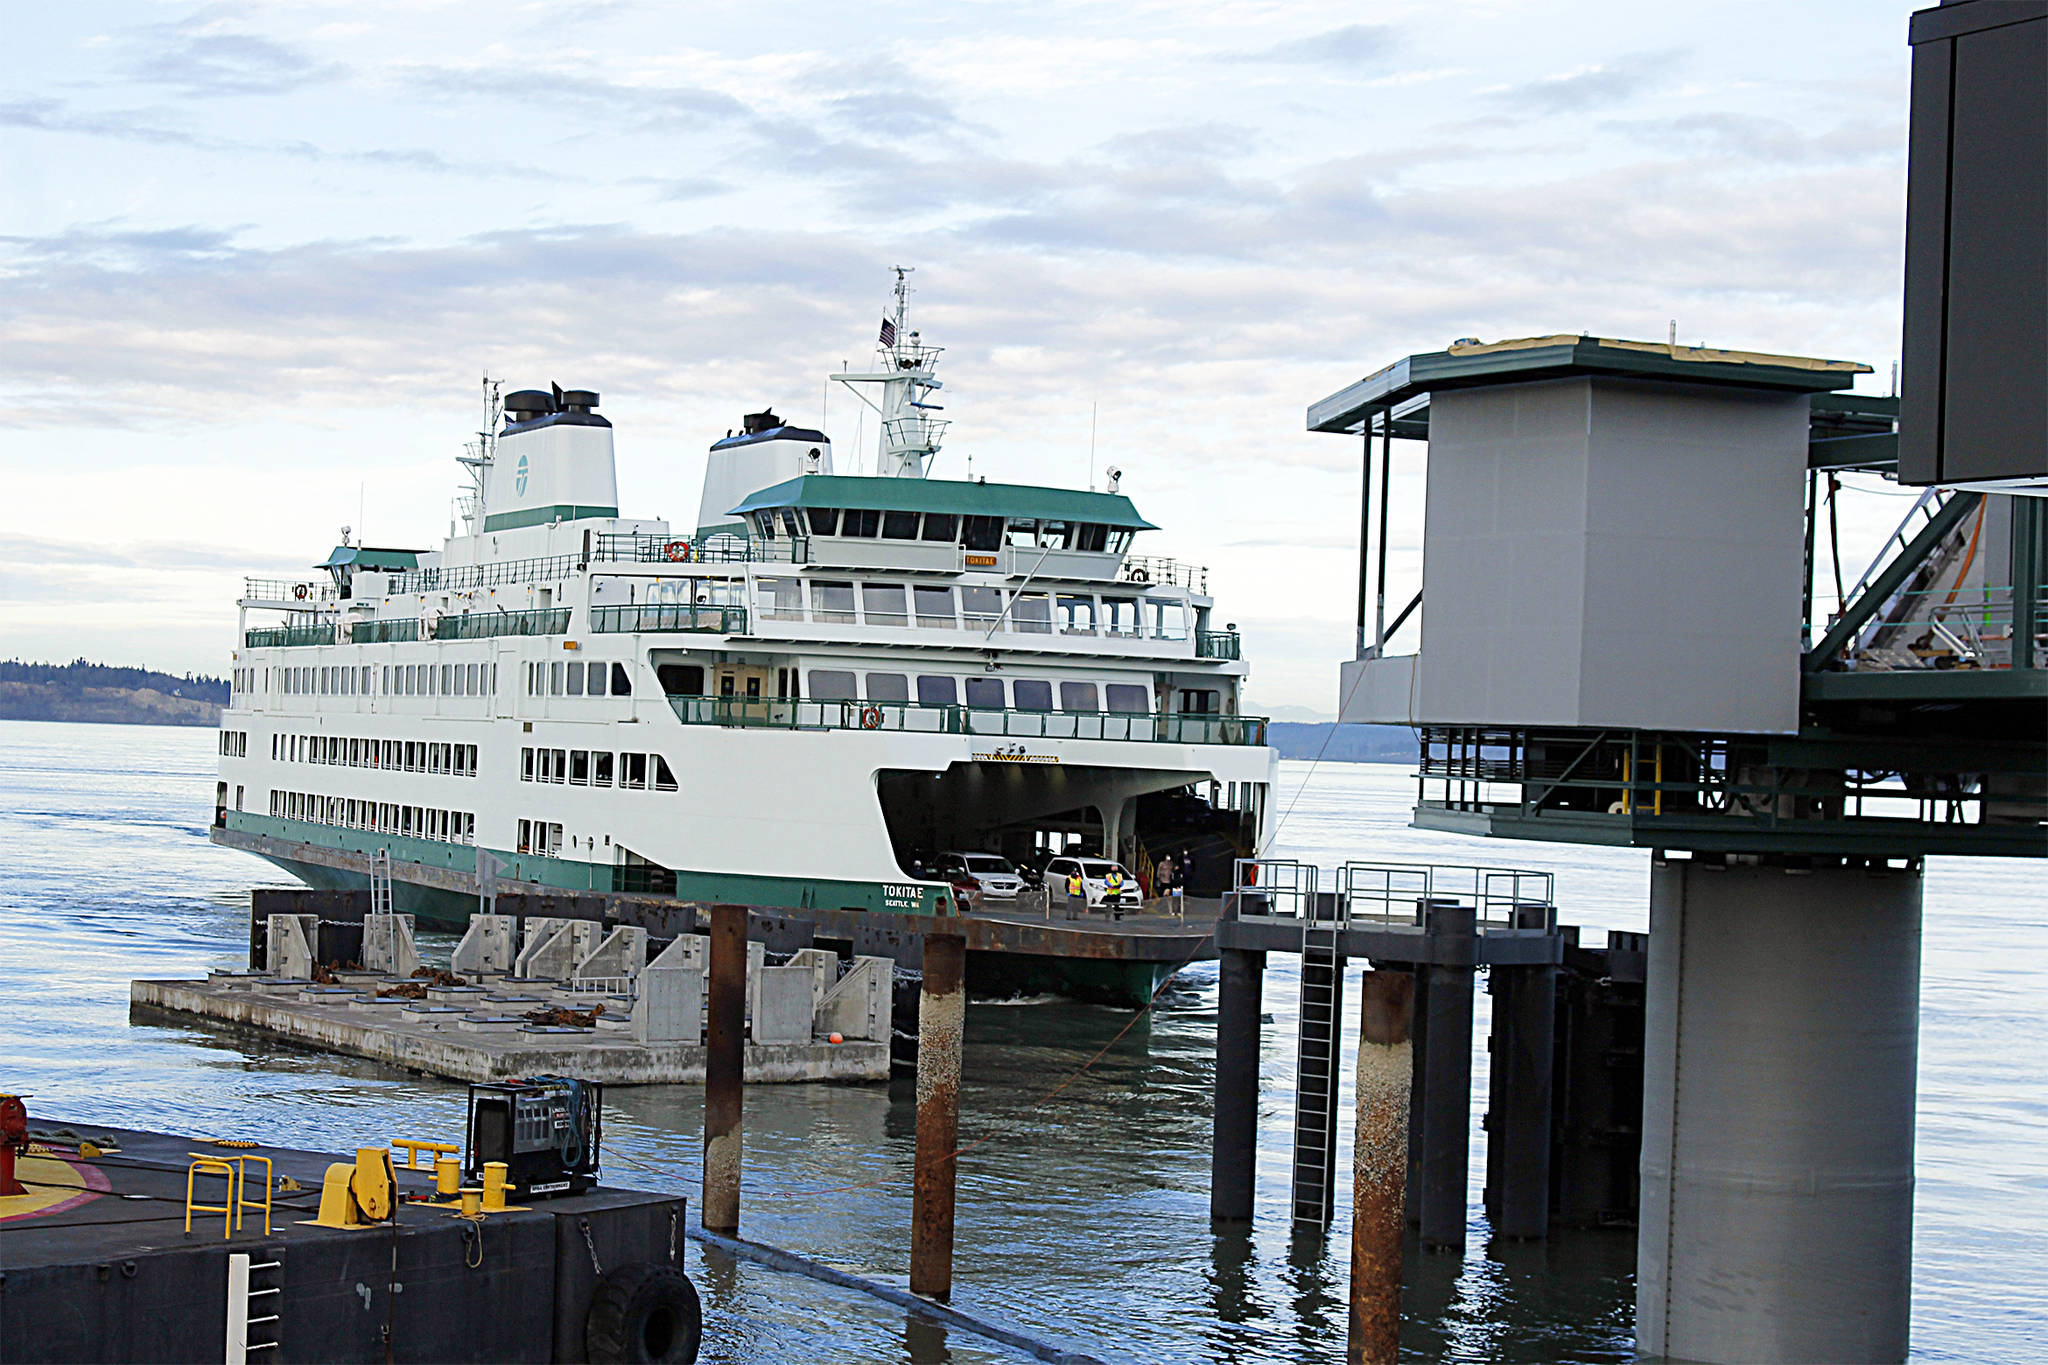 The Tokitae ferry pulls into the new Mukilteo ferry terminal Thursday afternoon. Photo by Kira Erickson/Whidbey News Group